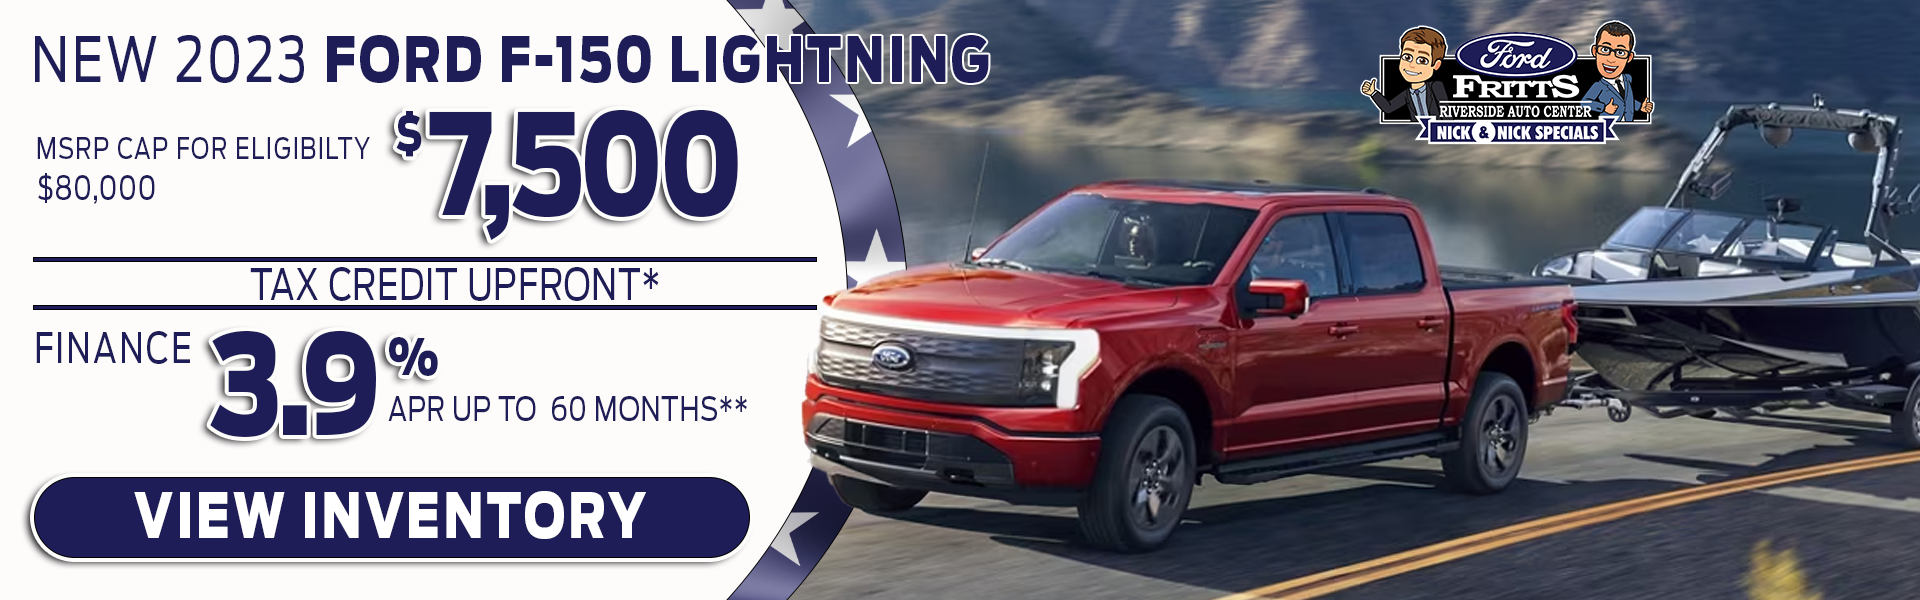 2023 Ford F-150 Lightning now offering $7,500 tax credit